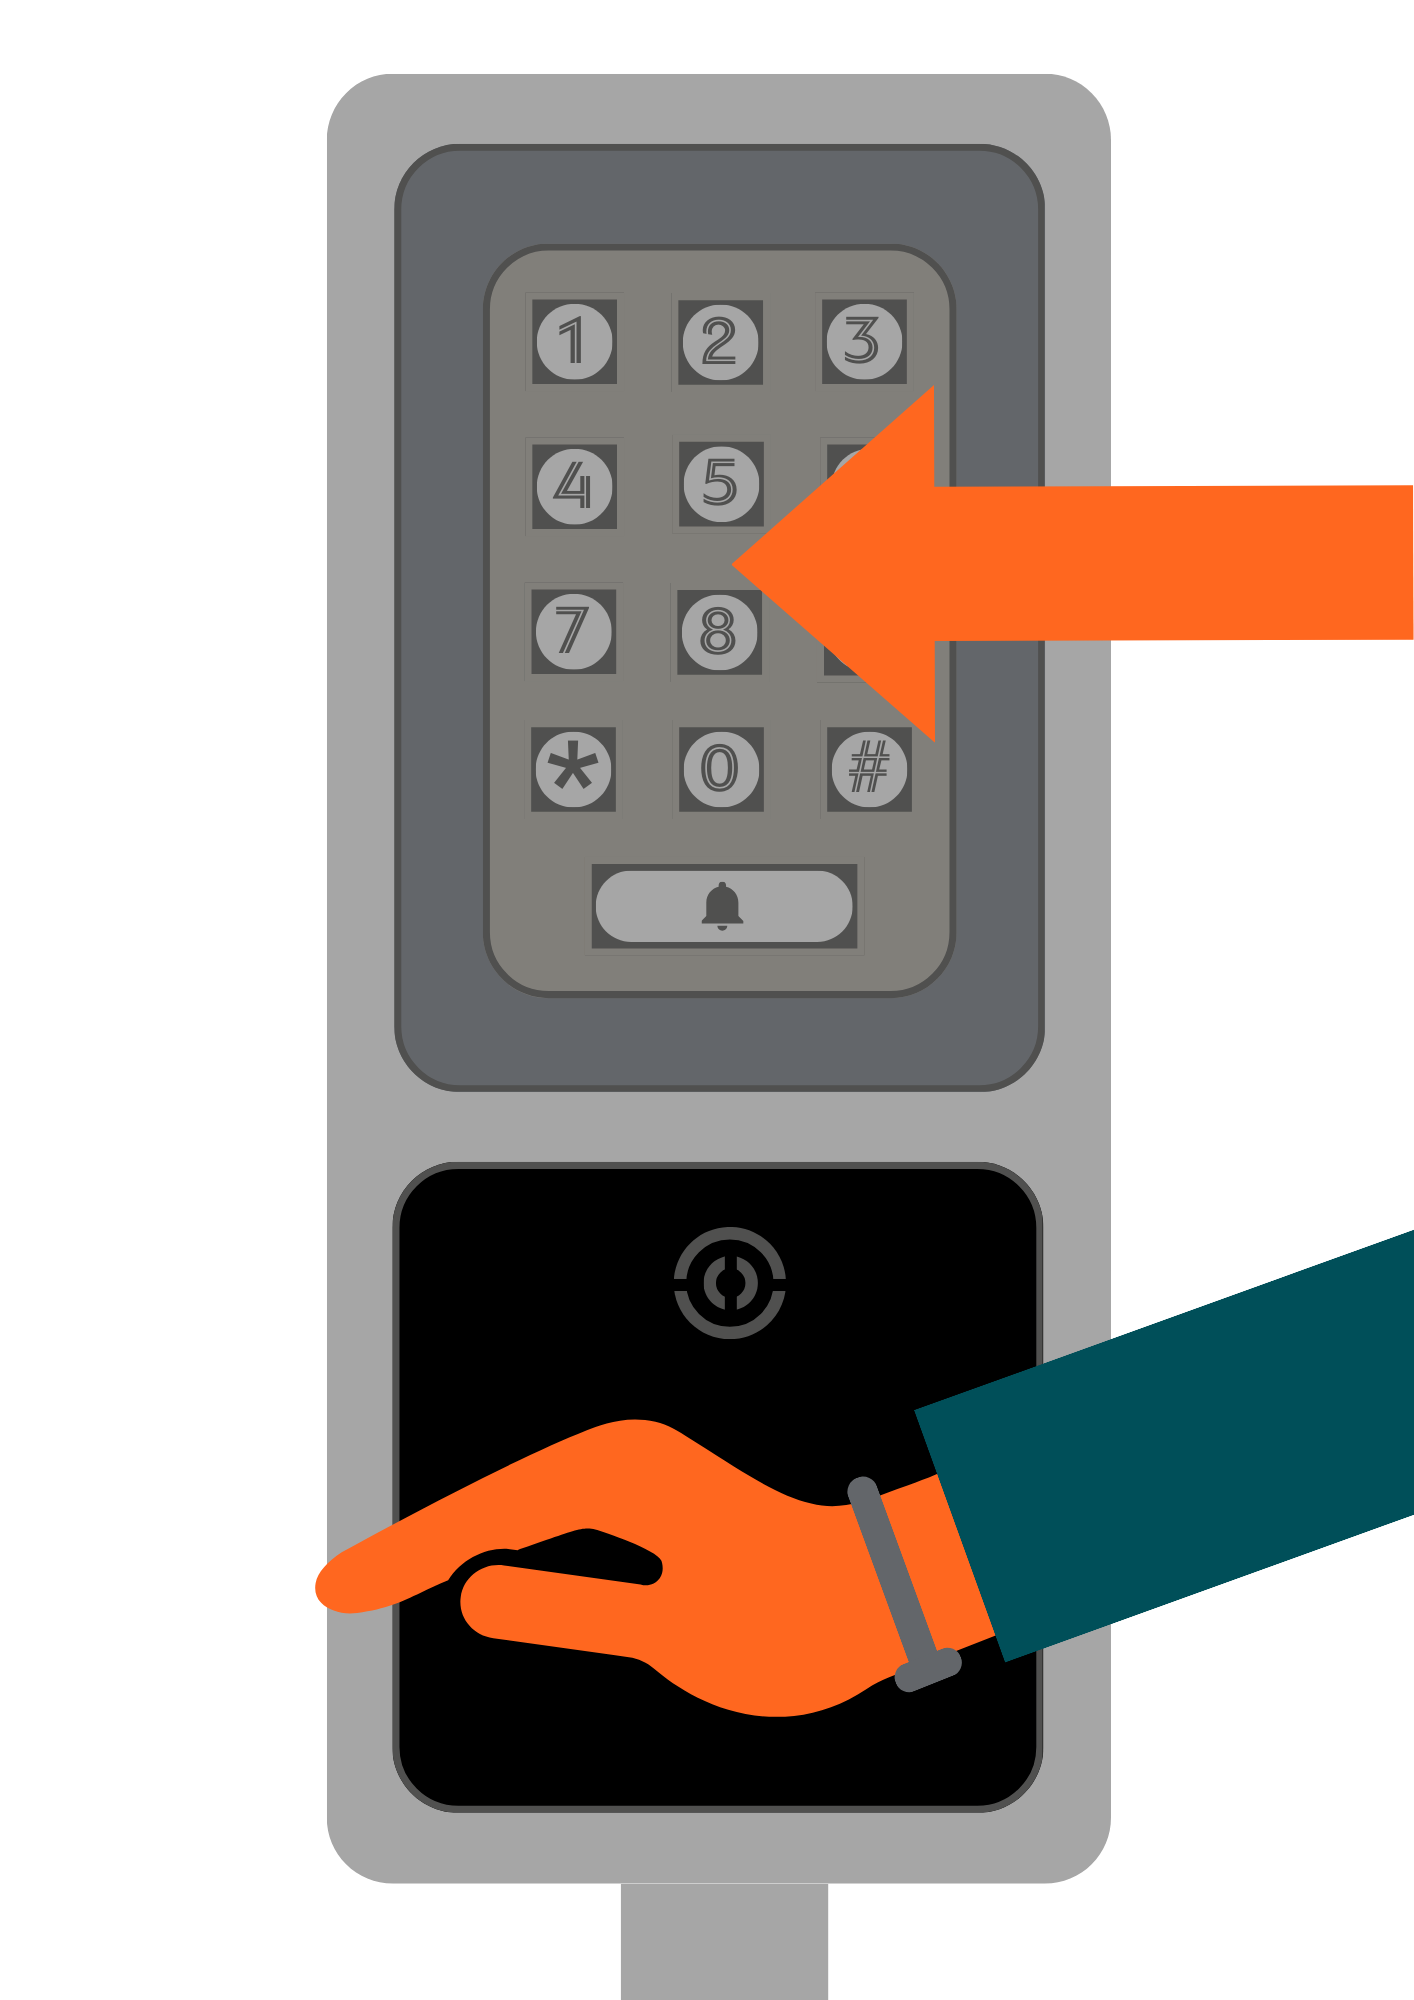 A diagram showing a numeric keypad where a code can be entered and an RFID reader below it where a wristband can be scanned